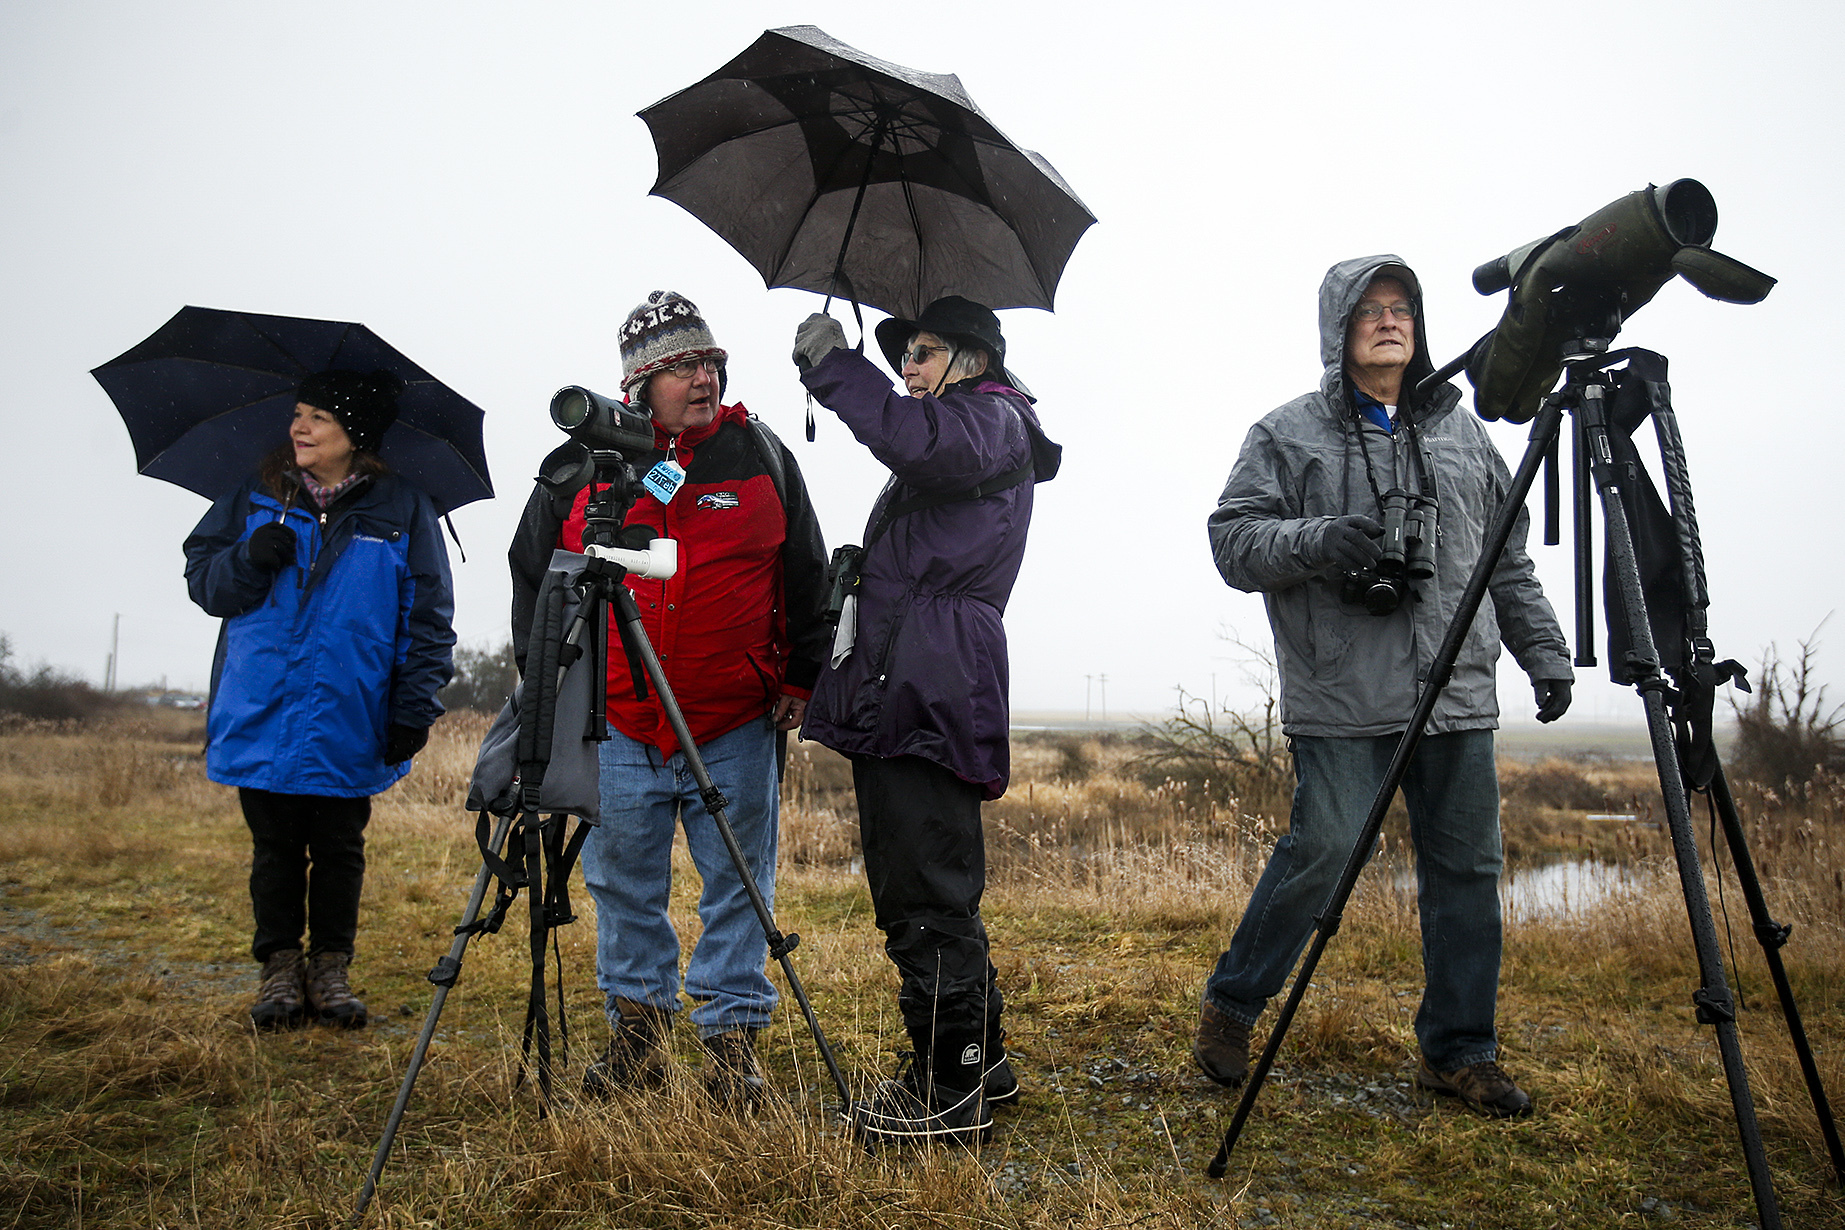 Braving Saturday’s rain, Mark and Peggy Shinkle (left), of Everett, chat with Pam Pritzl (center), of Camano Island, while Graham Hutchison (right), of Camano Island, looks out over the land on Port Susan Bay near Stanwood during a guided tour by The Nature Conservancy as part of the 10th Annual Arlington-Stillaguamish Eagle Festival. Ian Terry / The Herald